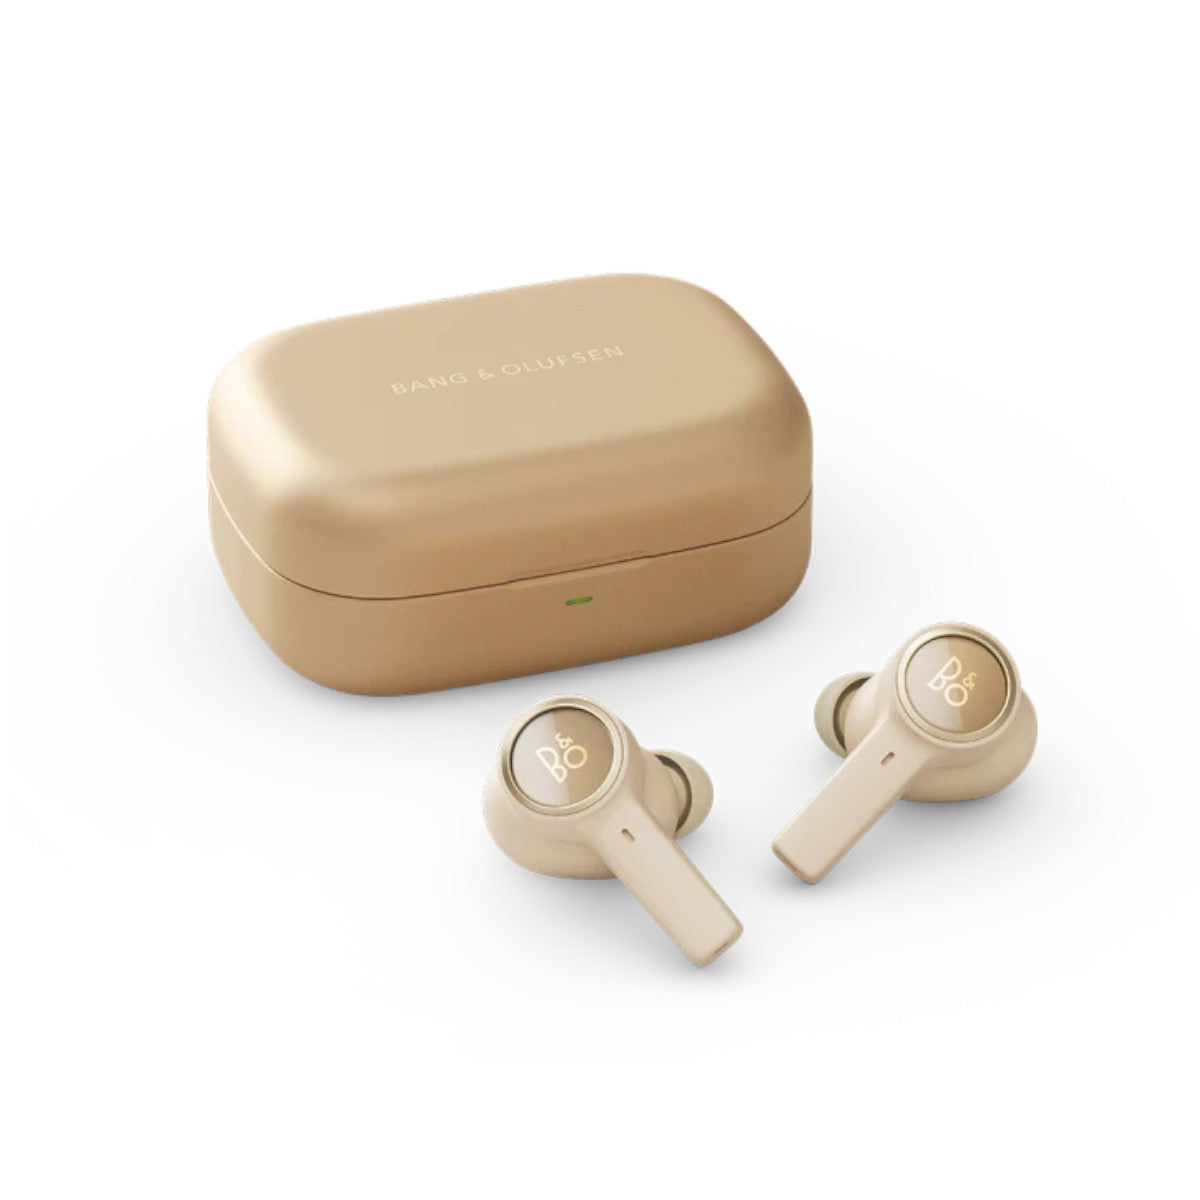 Bang & Olufsen Beoplay EX Wireless Bluetooth Earbuds - Gold Tone